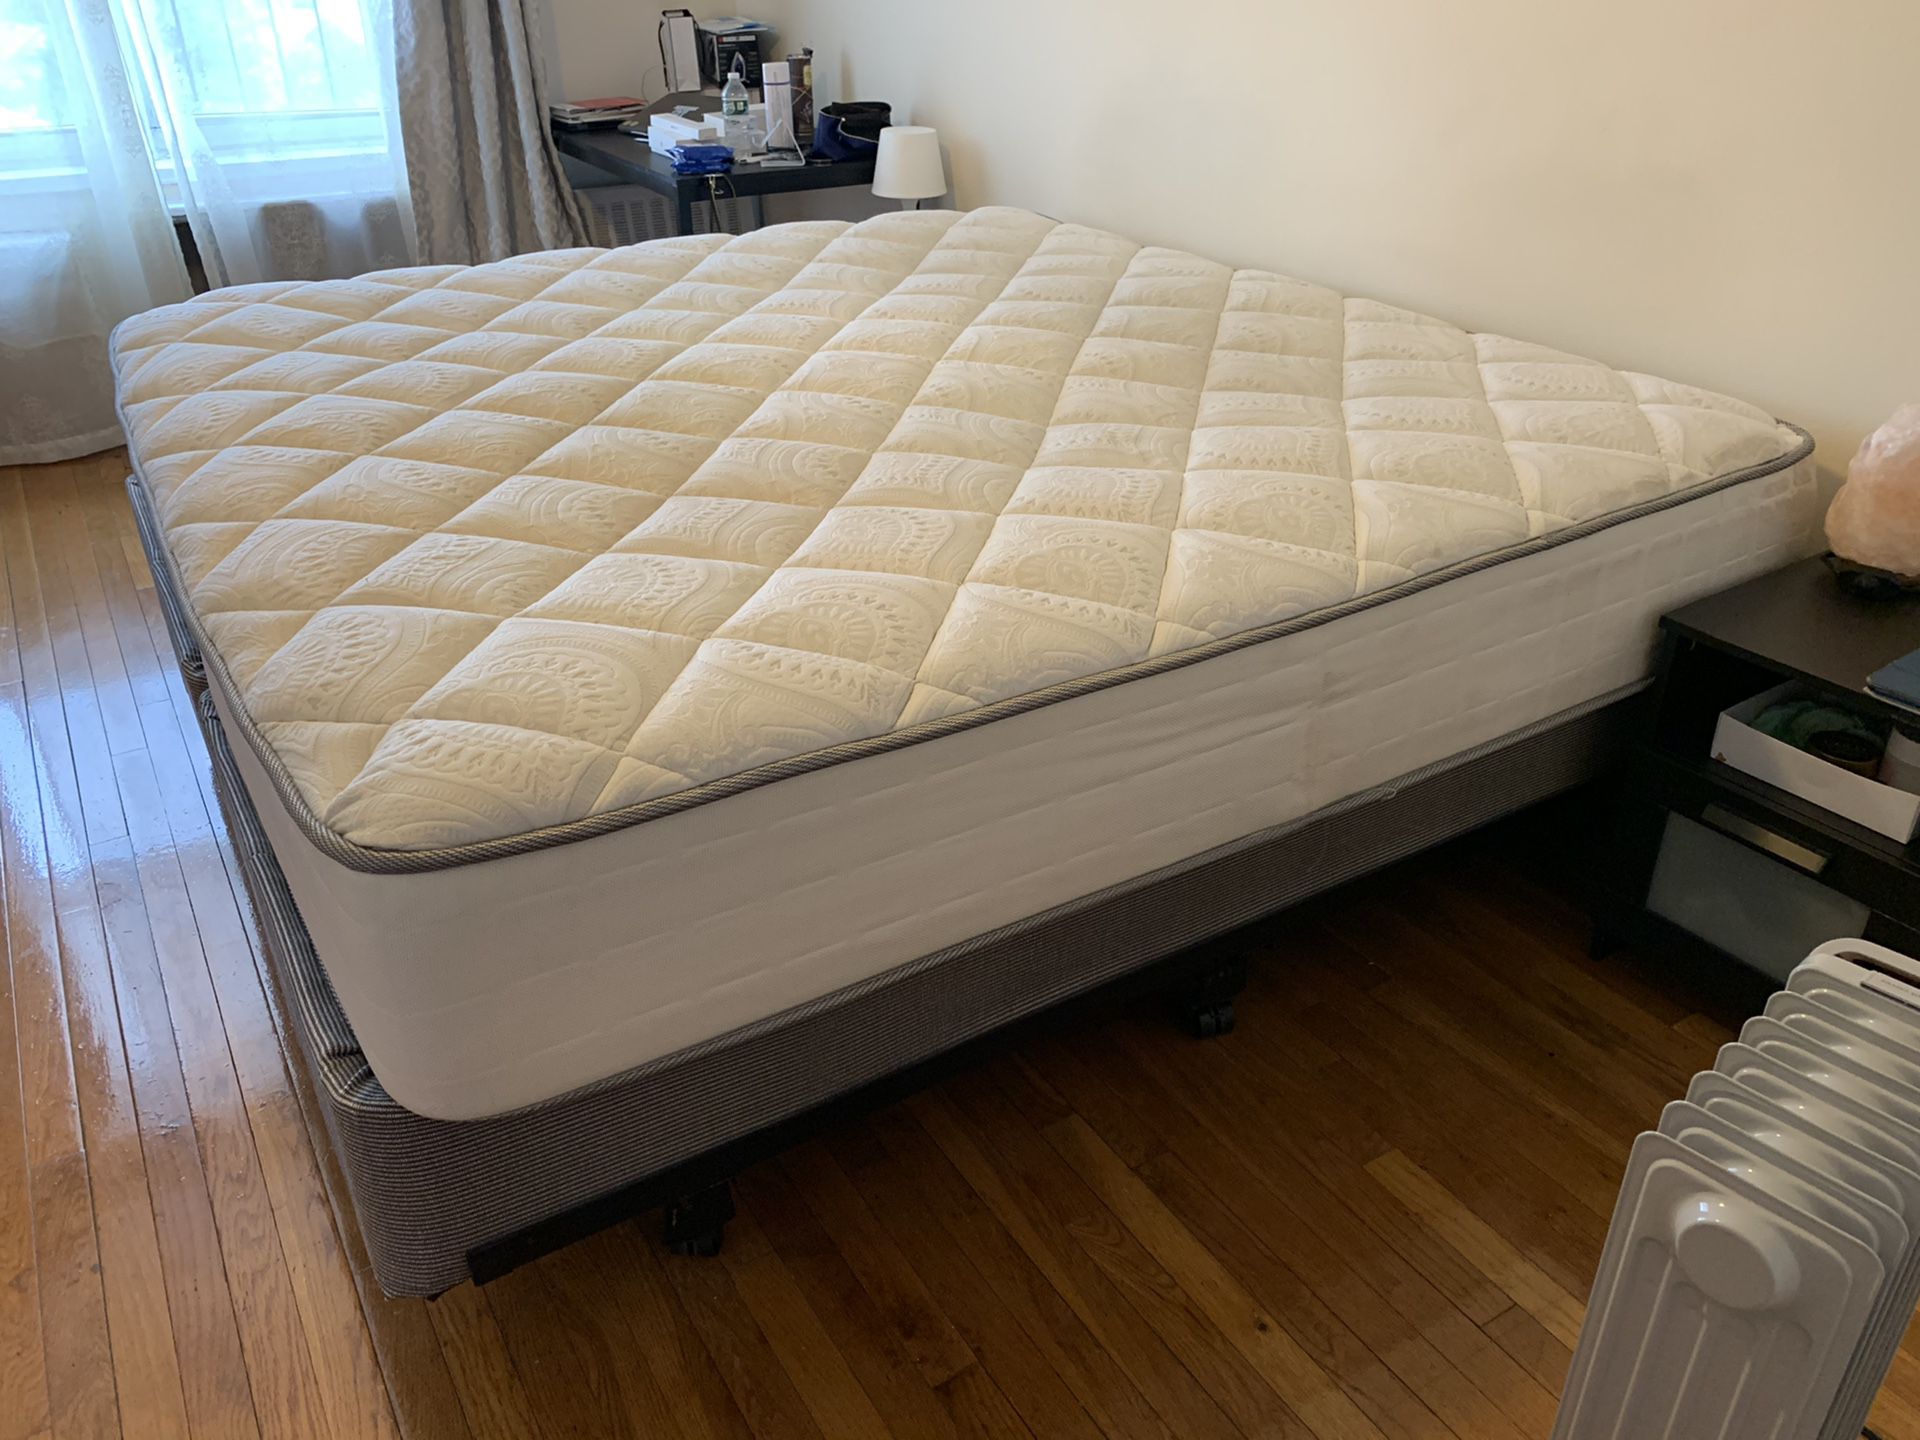 Full king size bed - Free pick up.